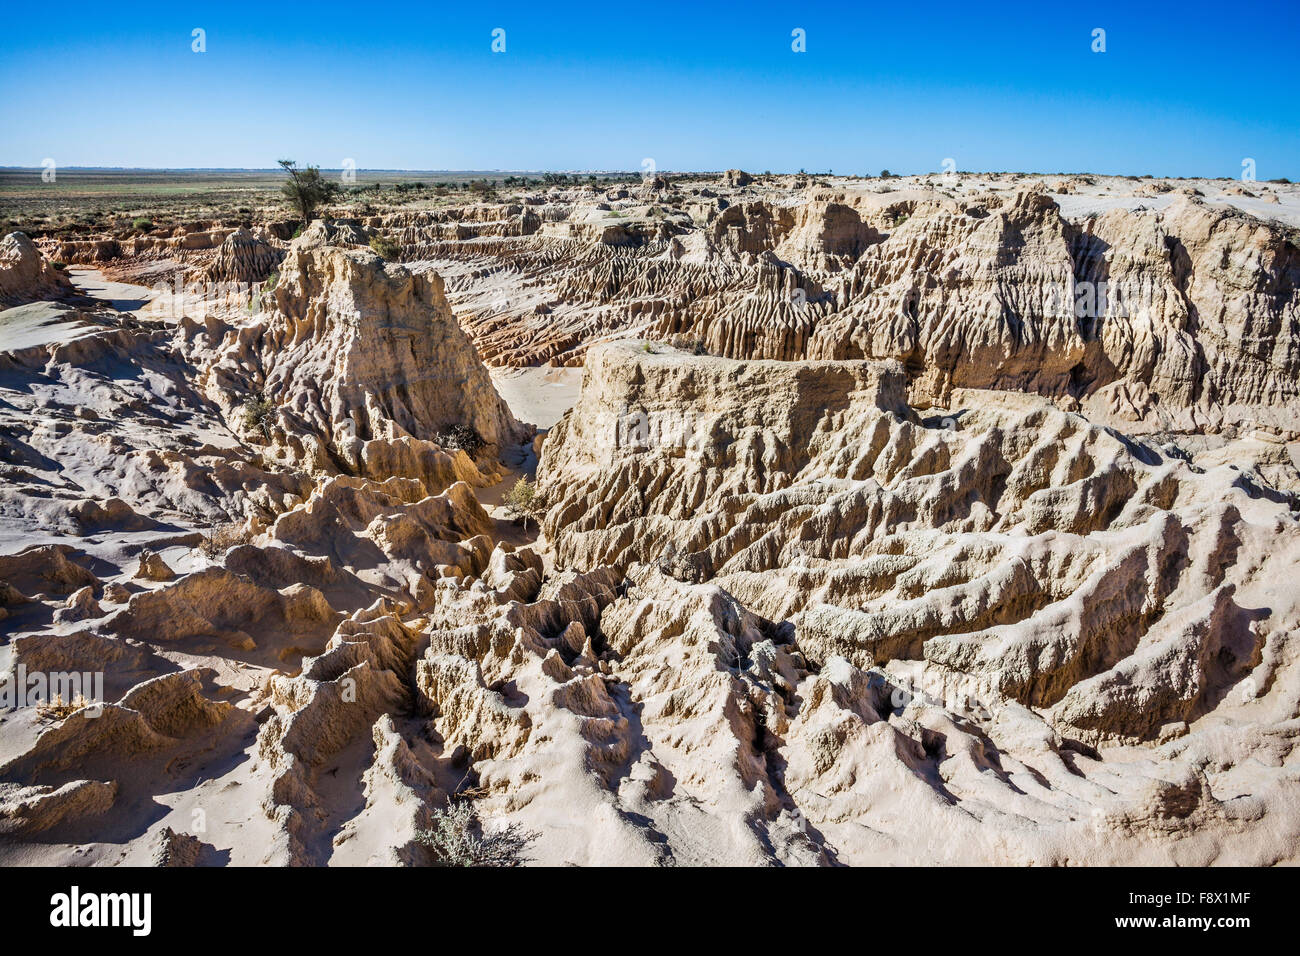 Australia, south western New South Wales, Mungo National Park, Walls of China lunette, coloured layers of eroded sand and clay Stock Photo